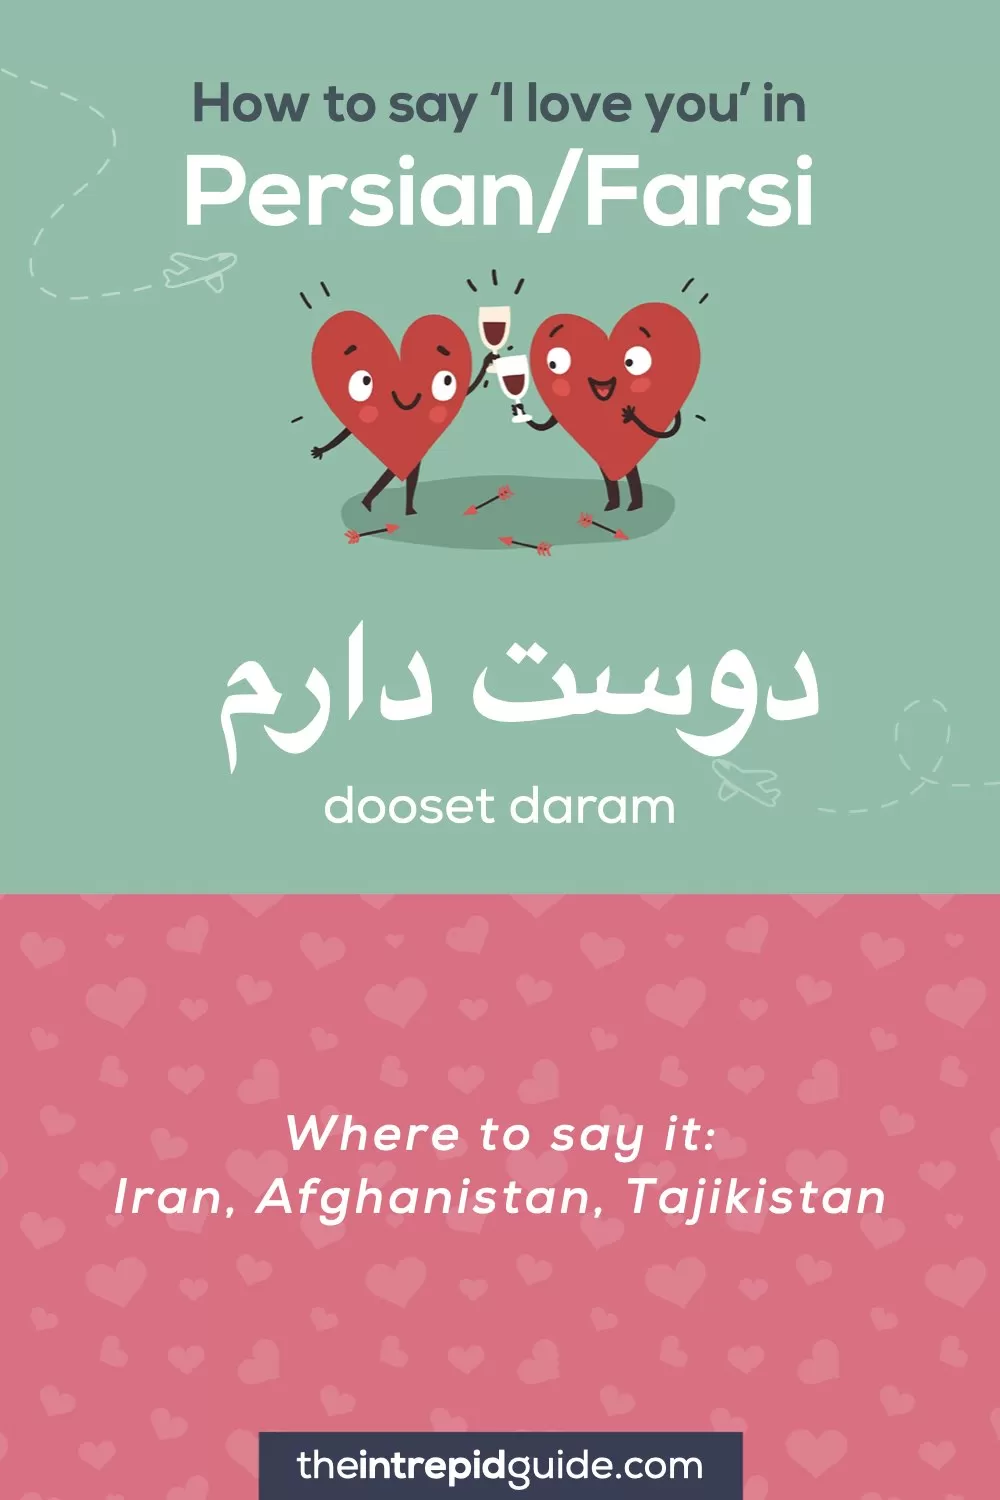 How to say I love you in different languages - Persian -Farsi - دوست دارم